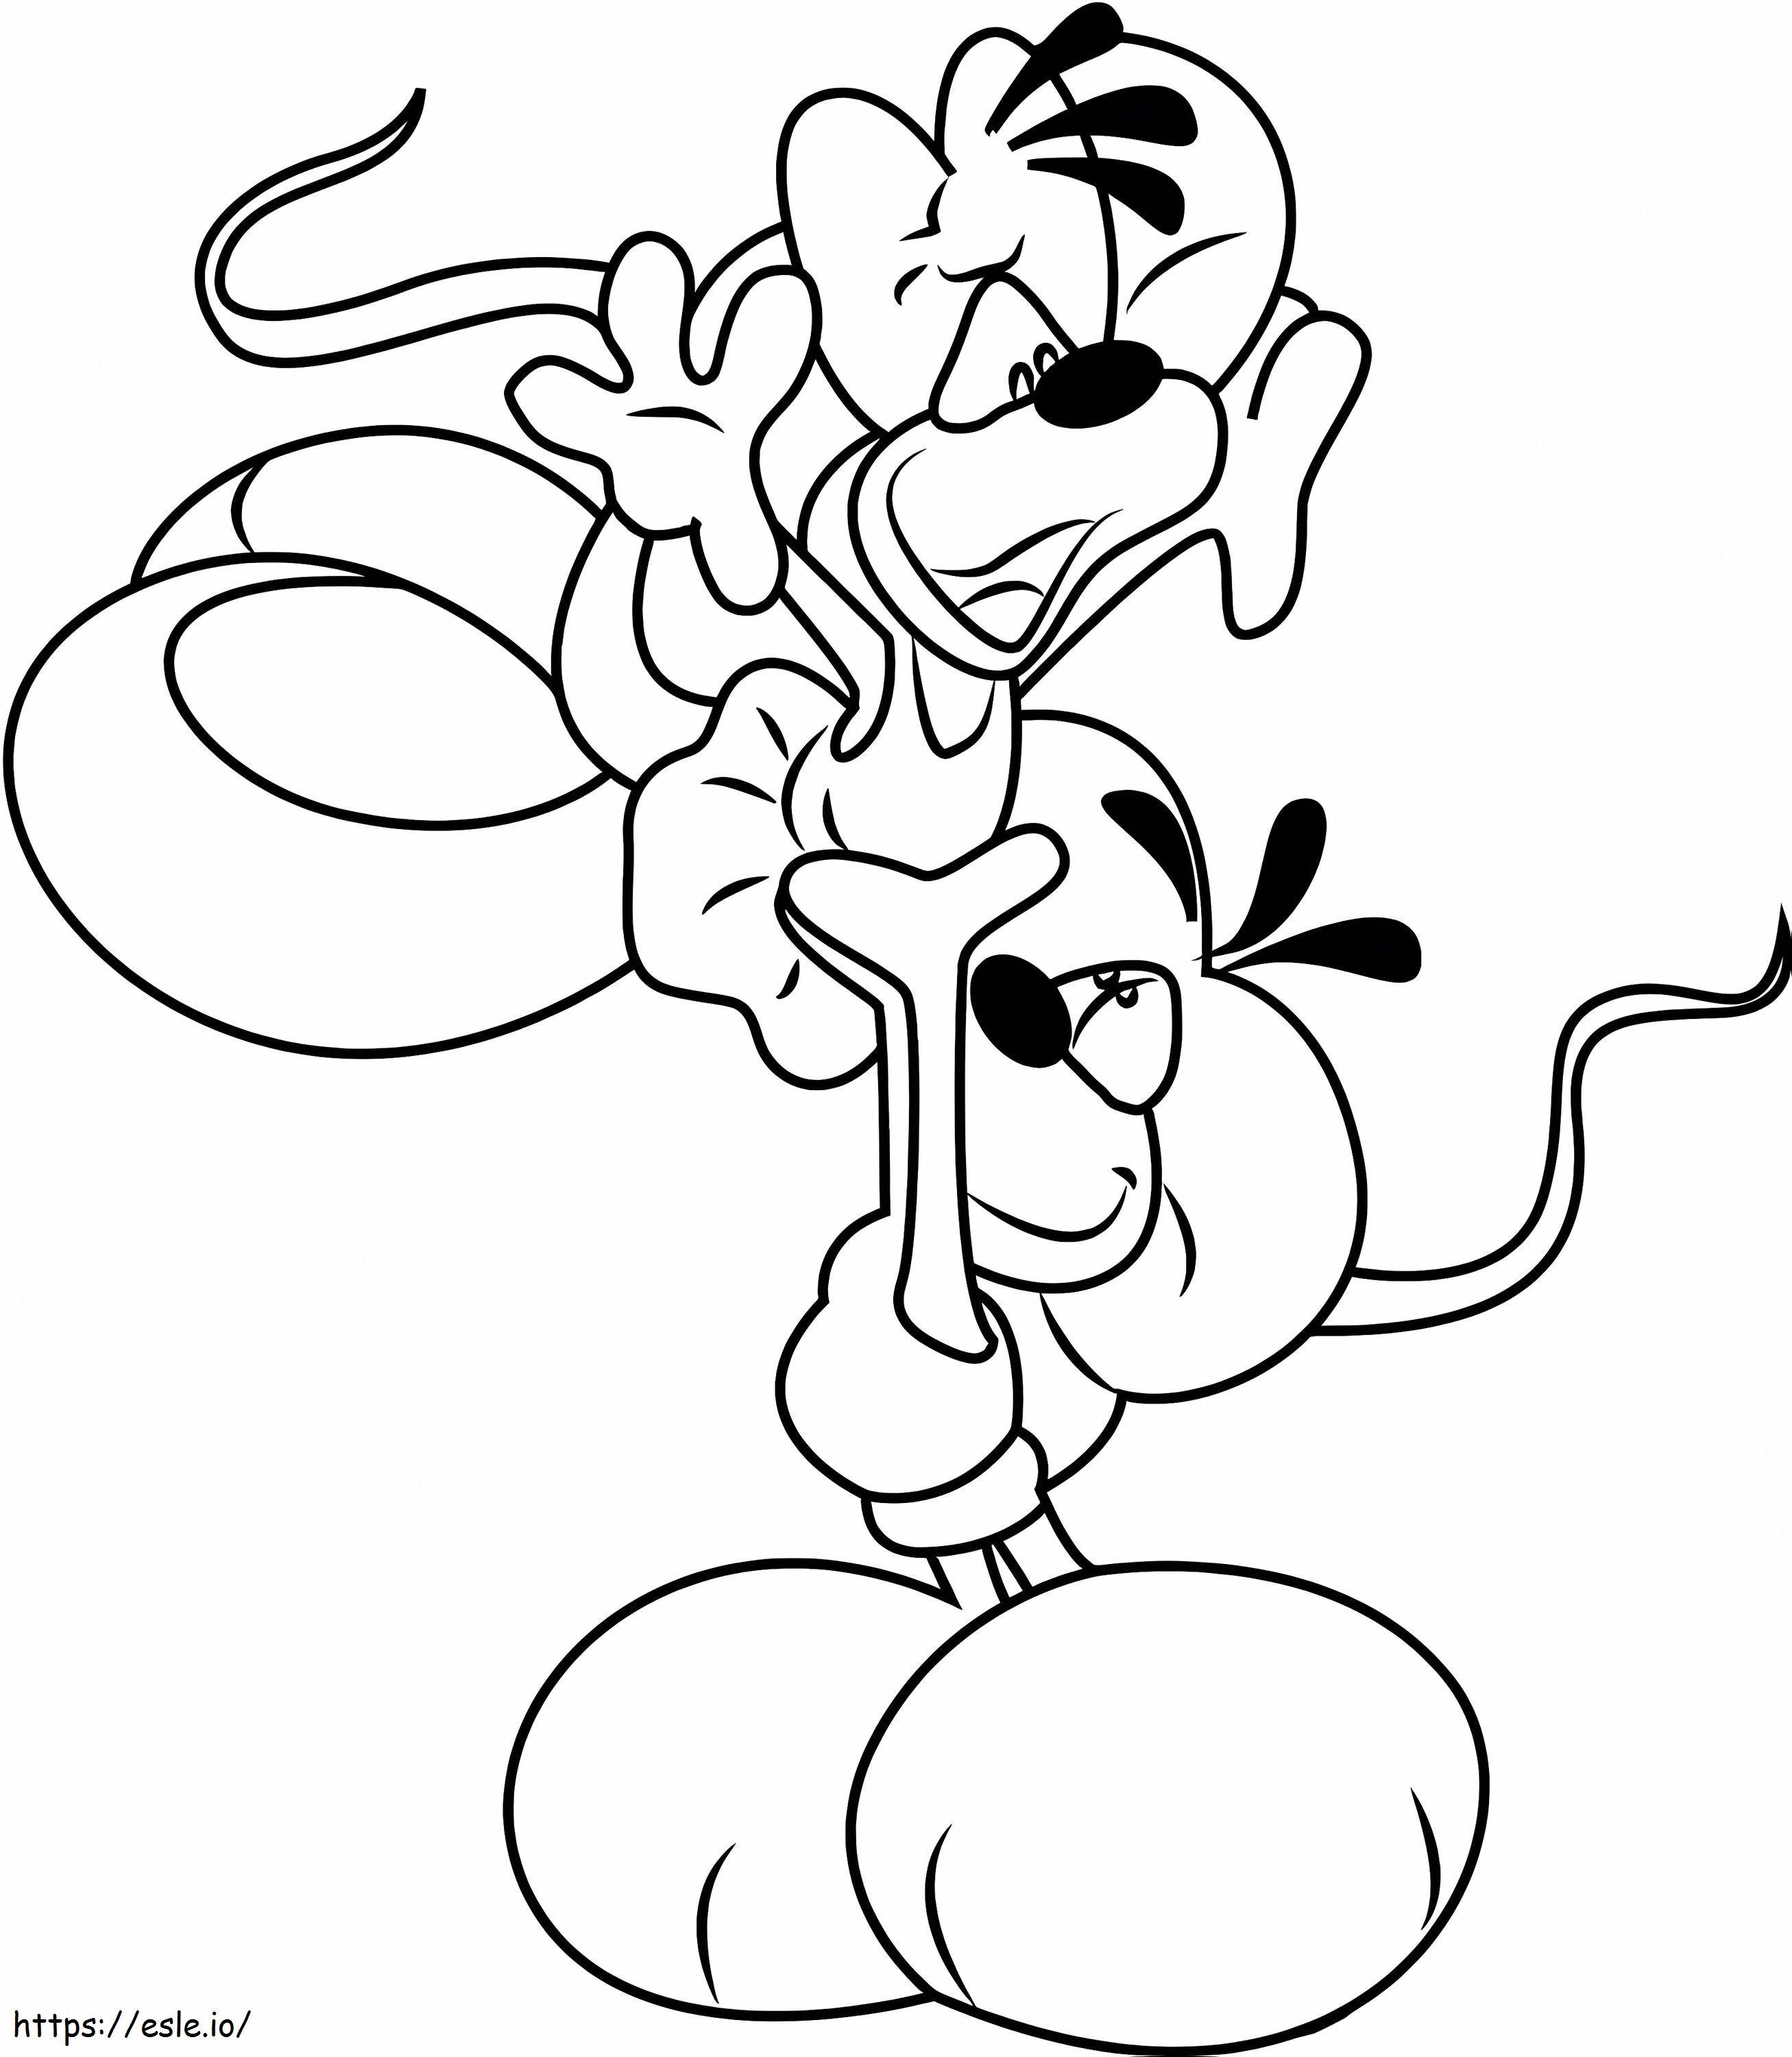 Diddlina And Diddl coloring page